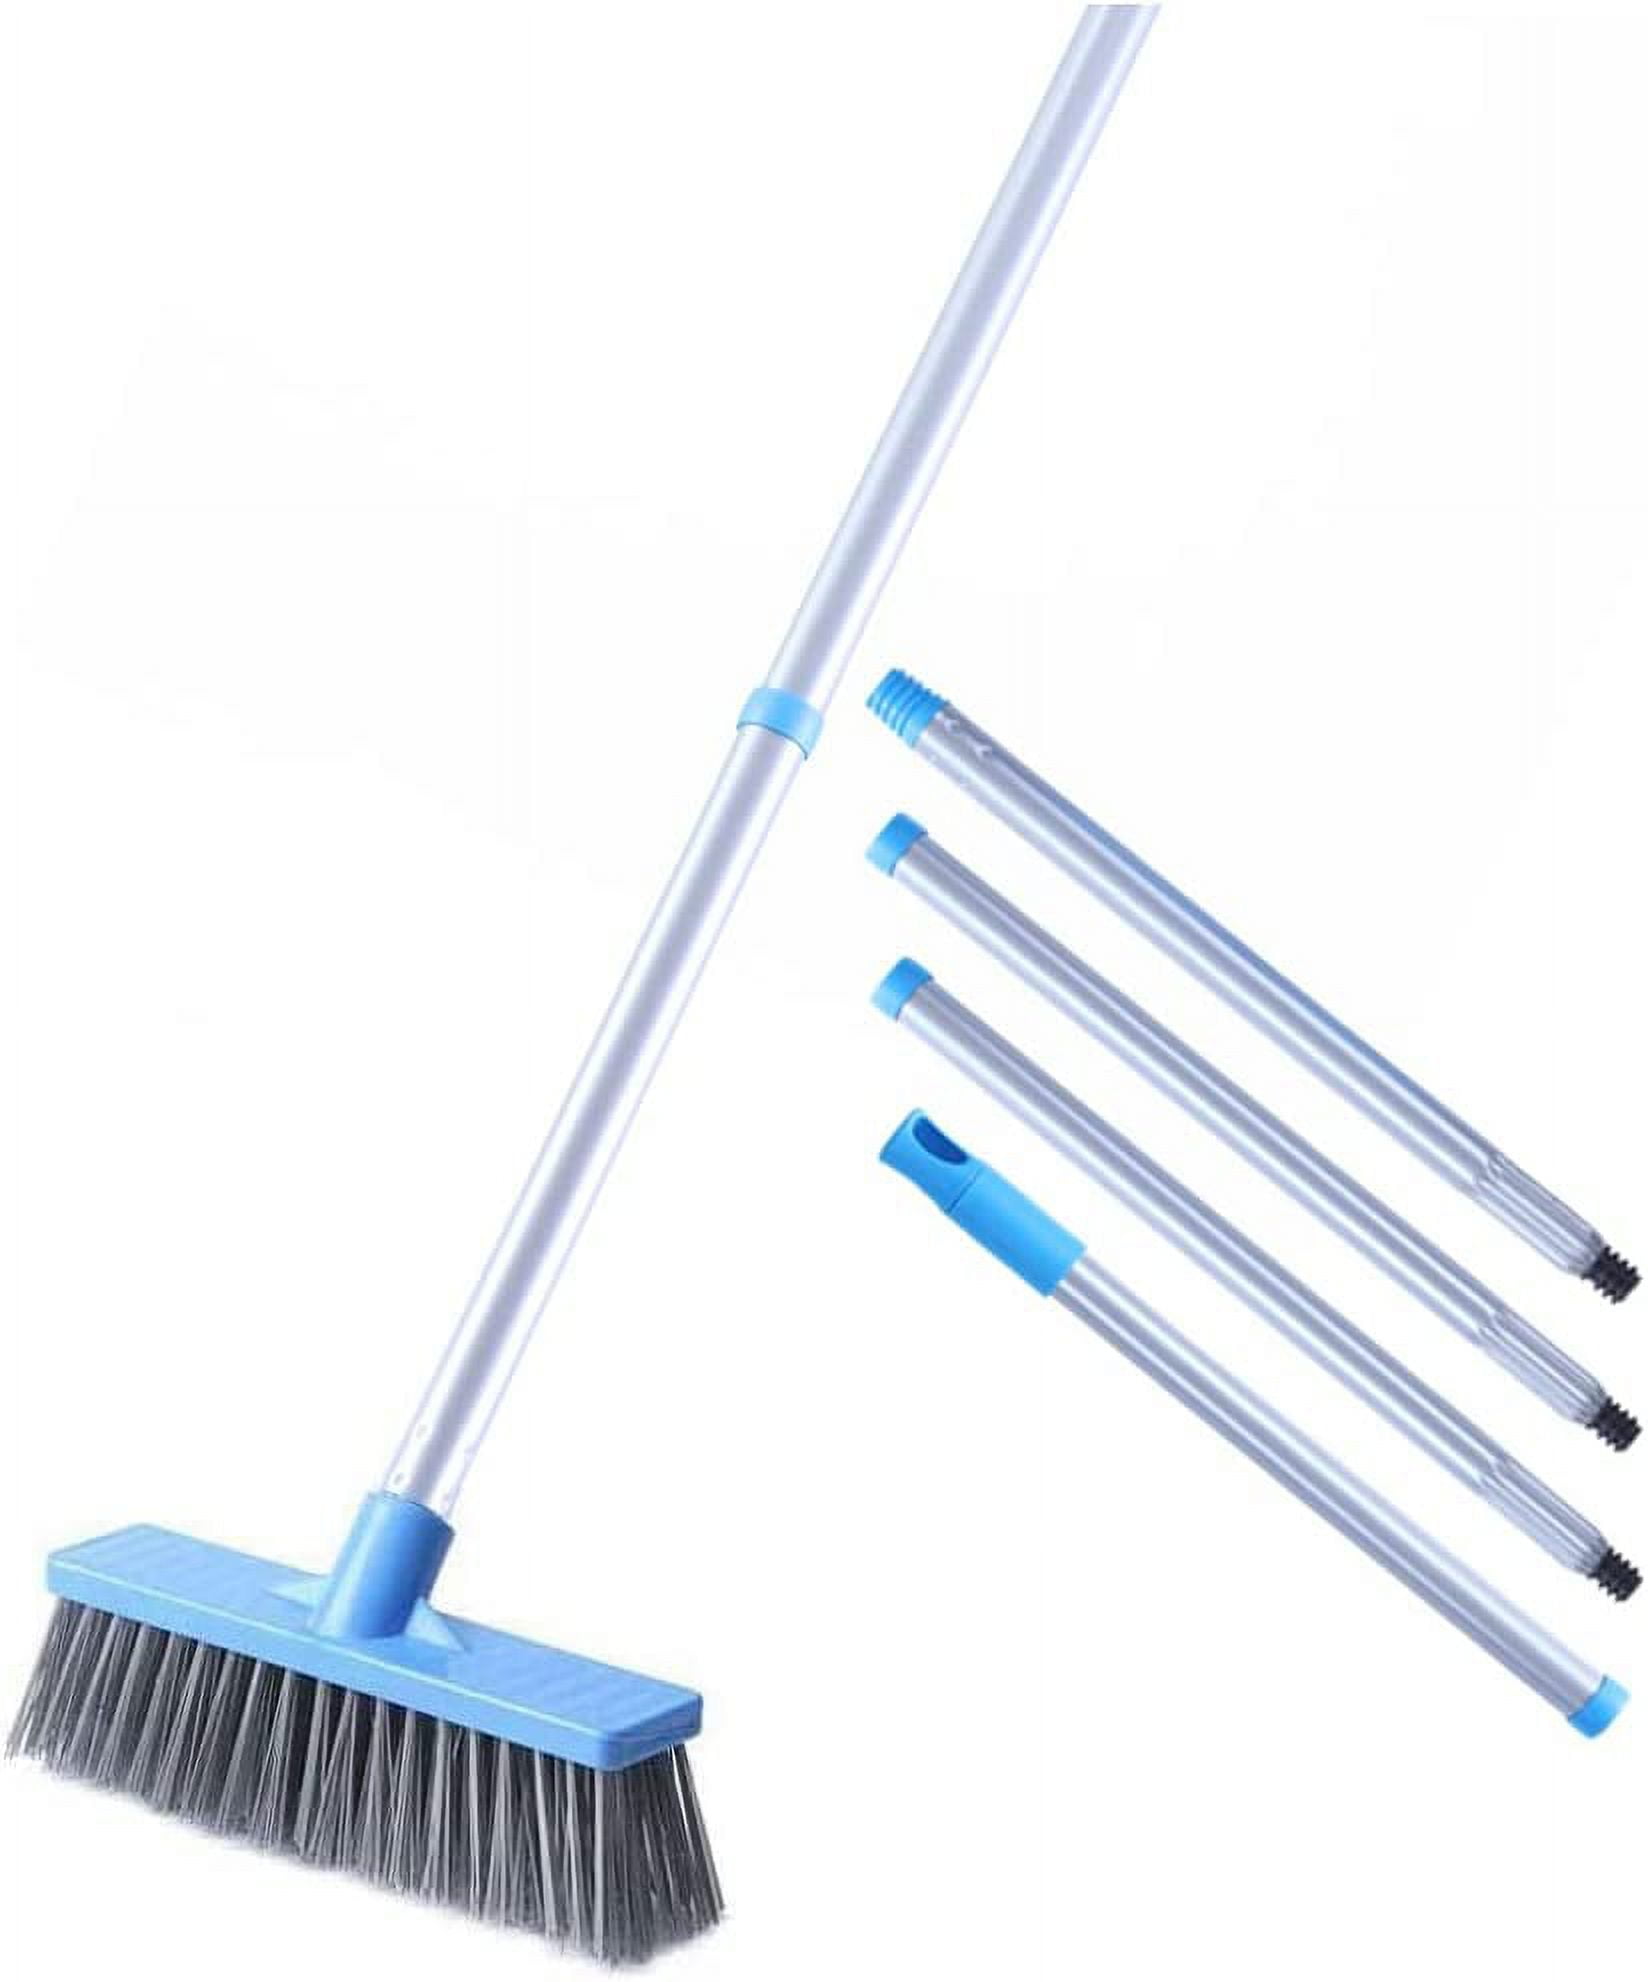 Floor Scrub Brush with Long Handle - 48 Stiff Bristle Shower Deck Brush,  Long Handled Grout Scrubbing Brushes for Cleaning Tile, Shower, Tub,  Bathtub